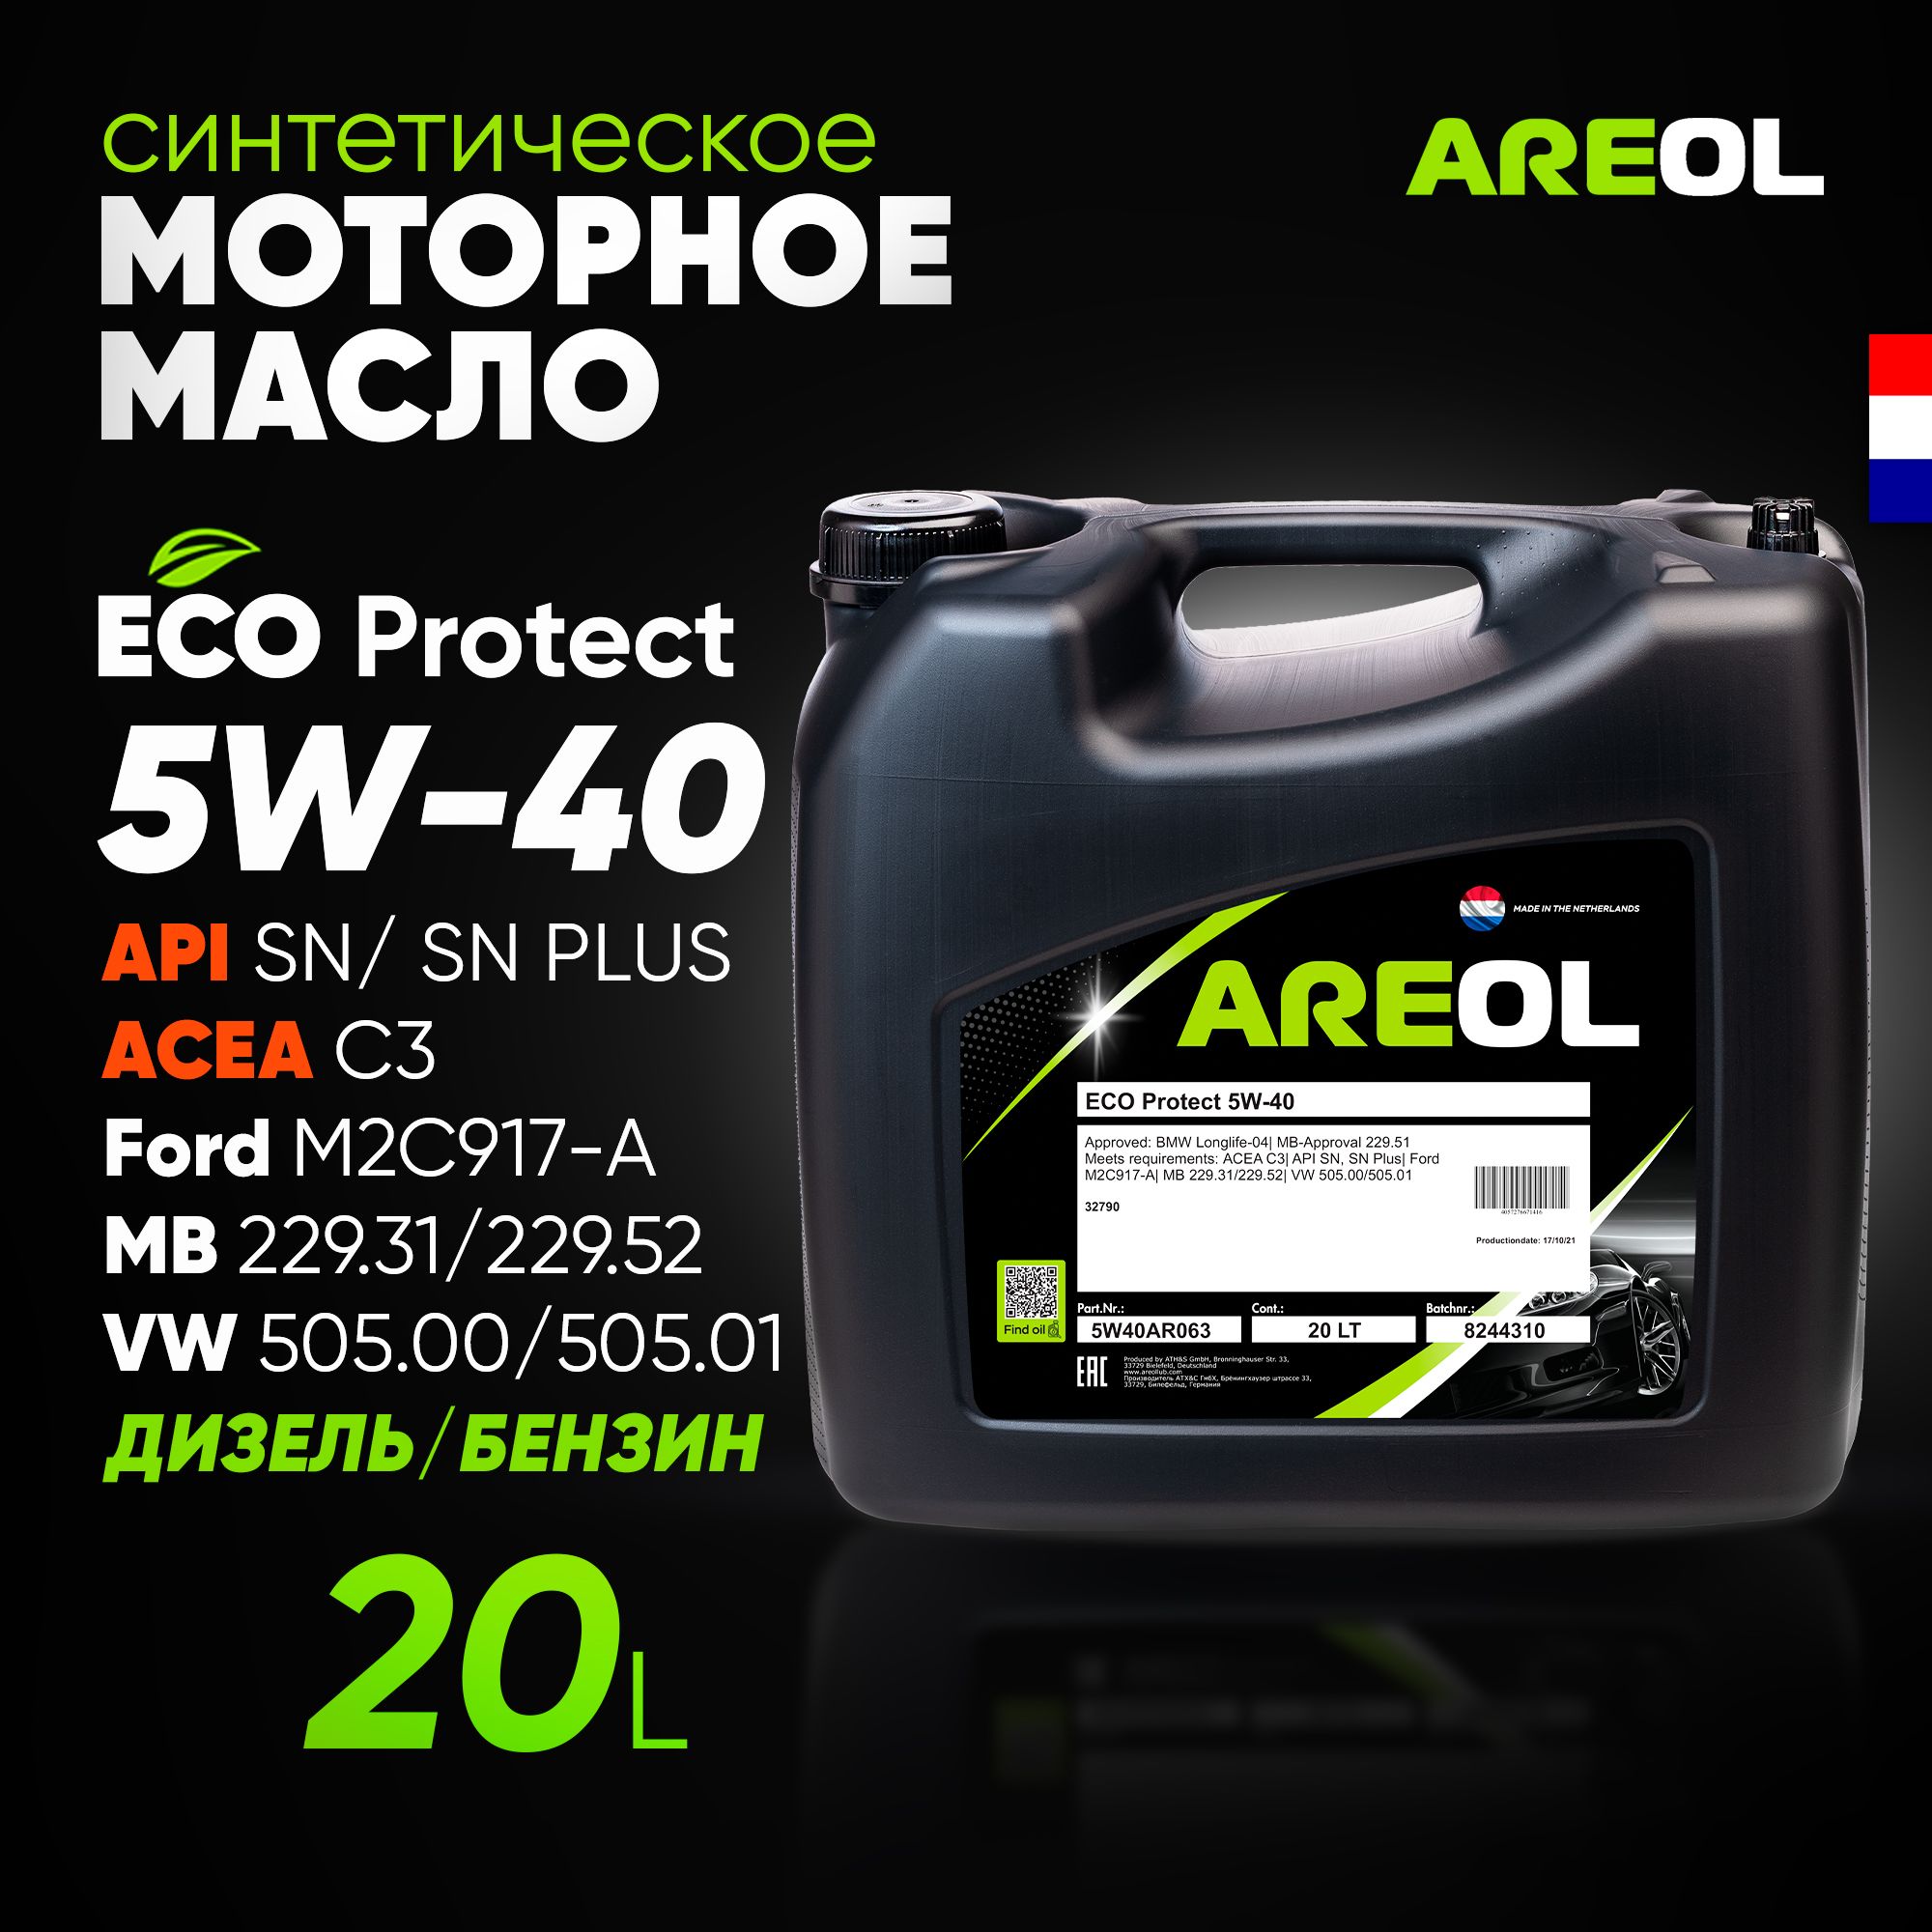 Areol 5w40 масло. Areol 5w40ar009. Areol Max protect 5w-40 5l. Моторное масло areol 5w40 характеристики. Areol Eco protect 5w-40 205л.